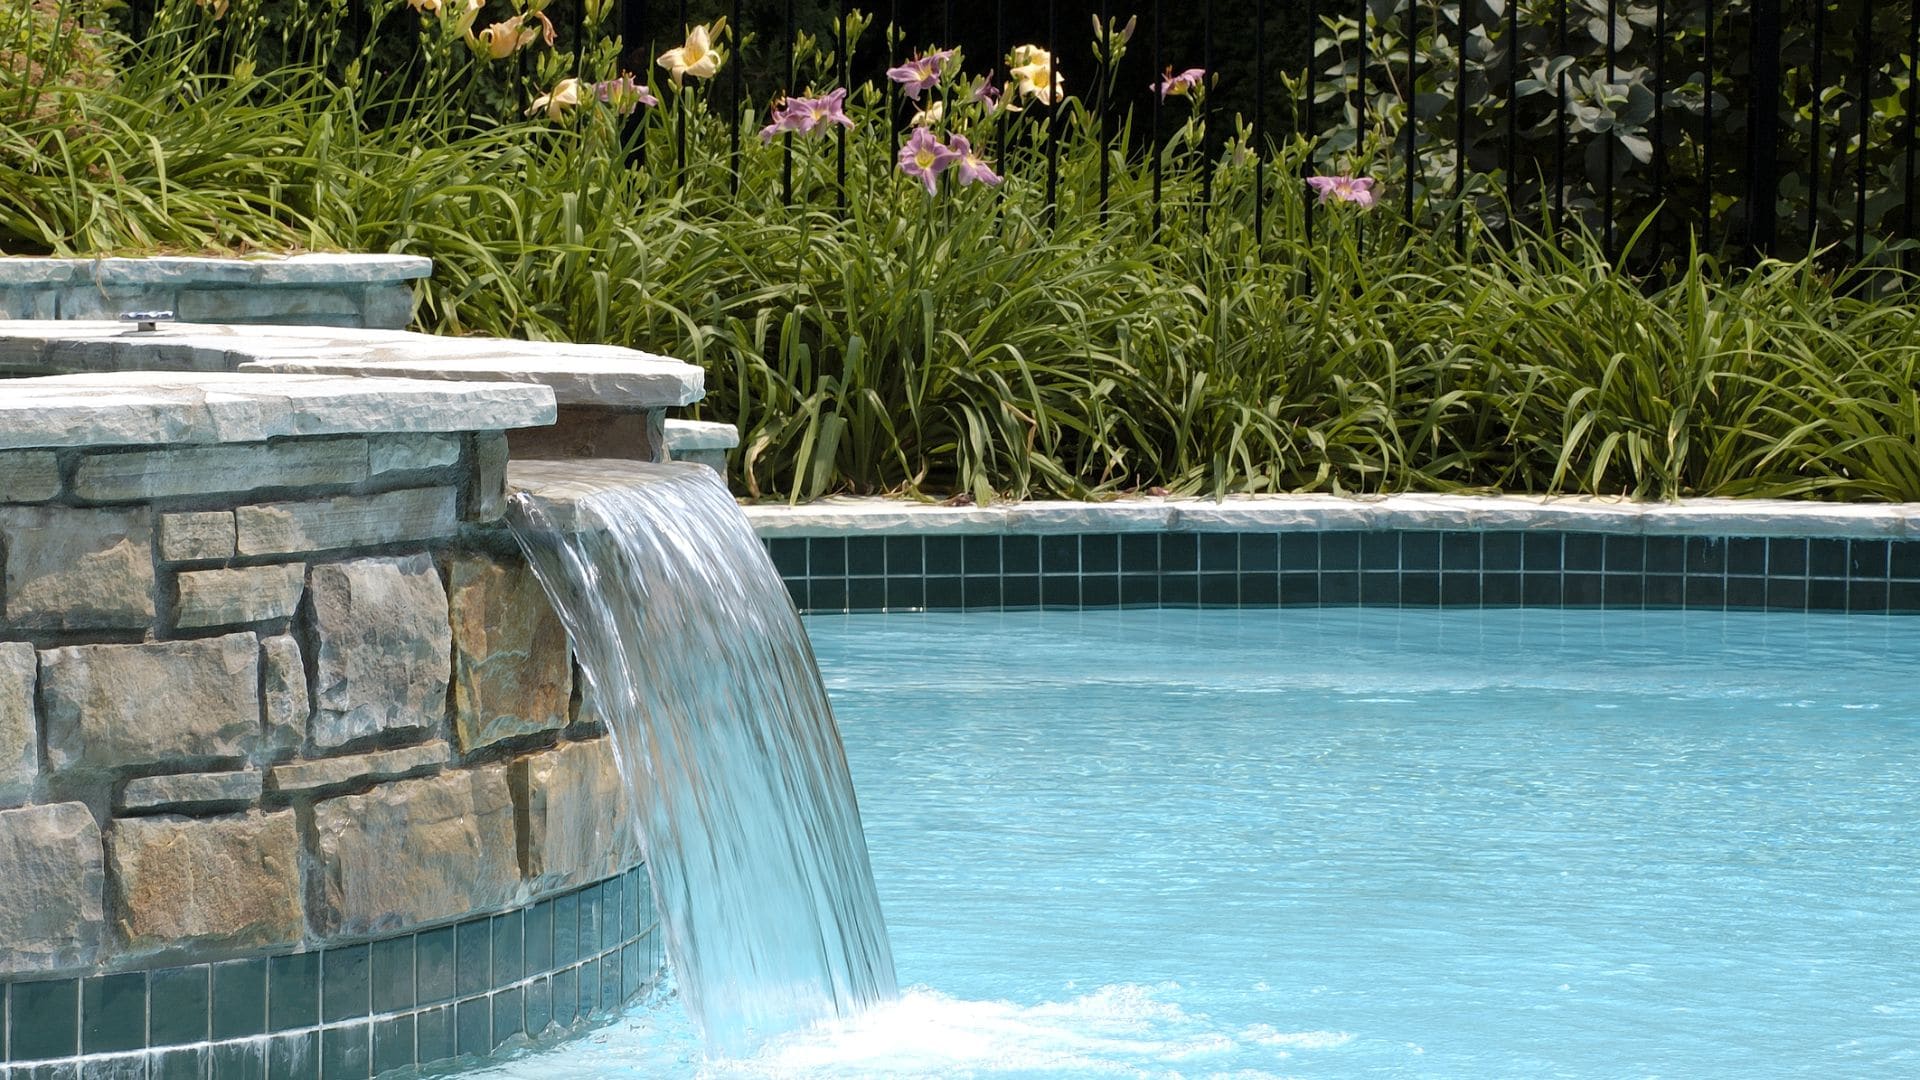 Things to Look for in a Quality Pool Supplies Distributor